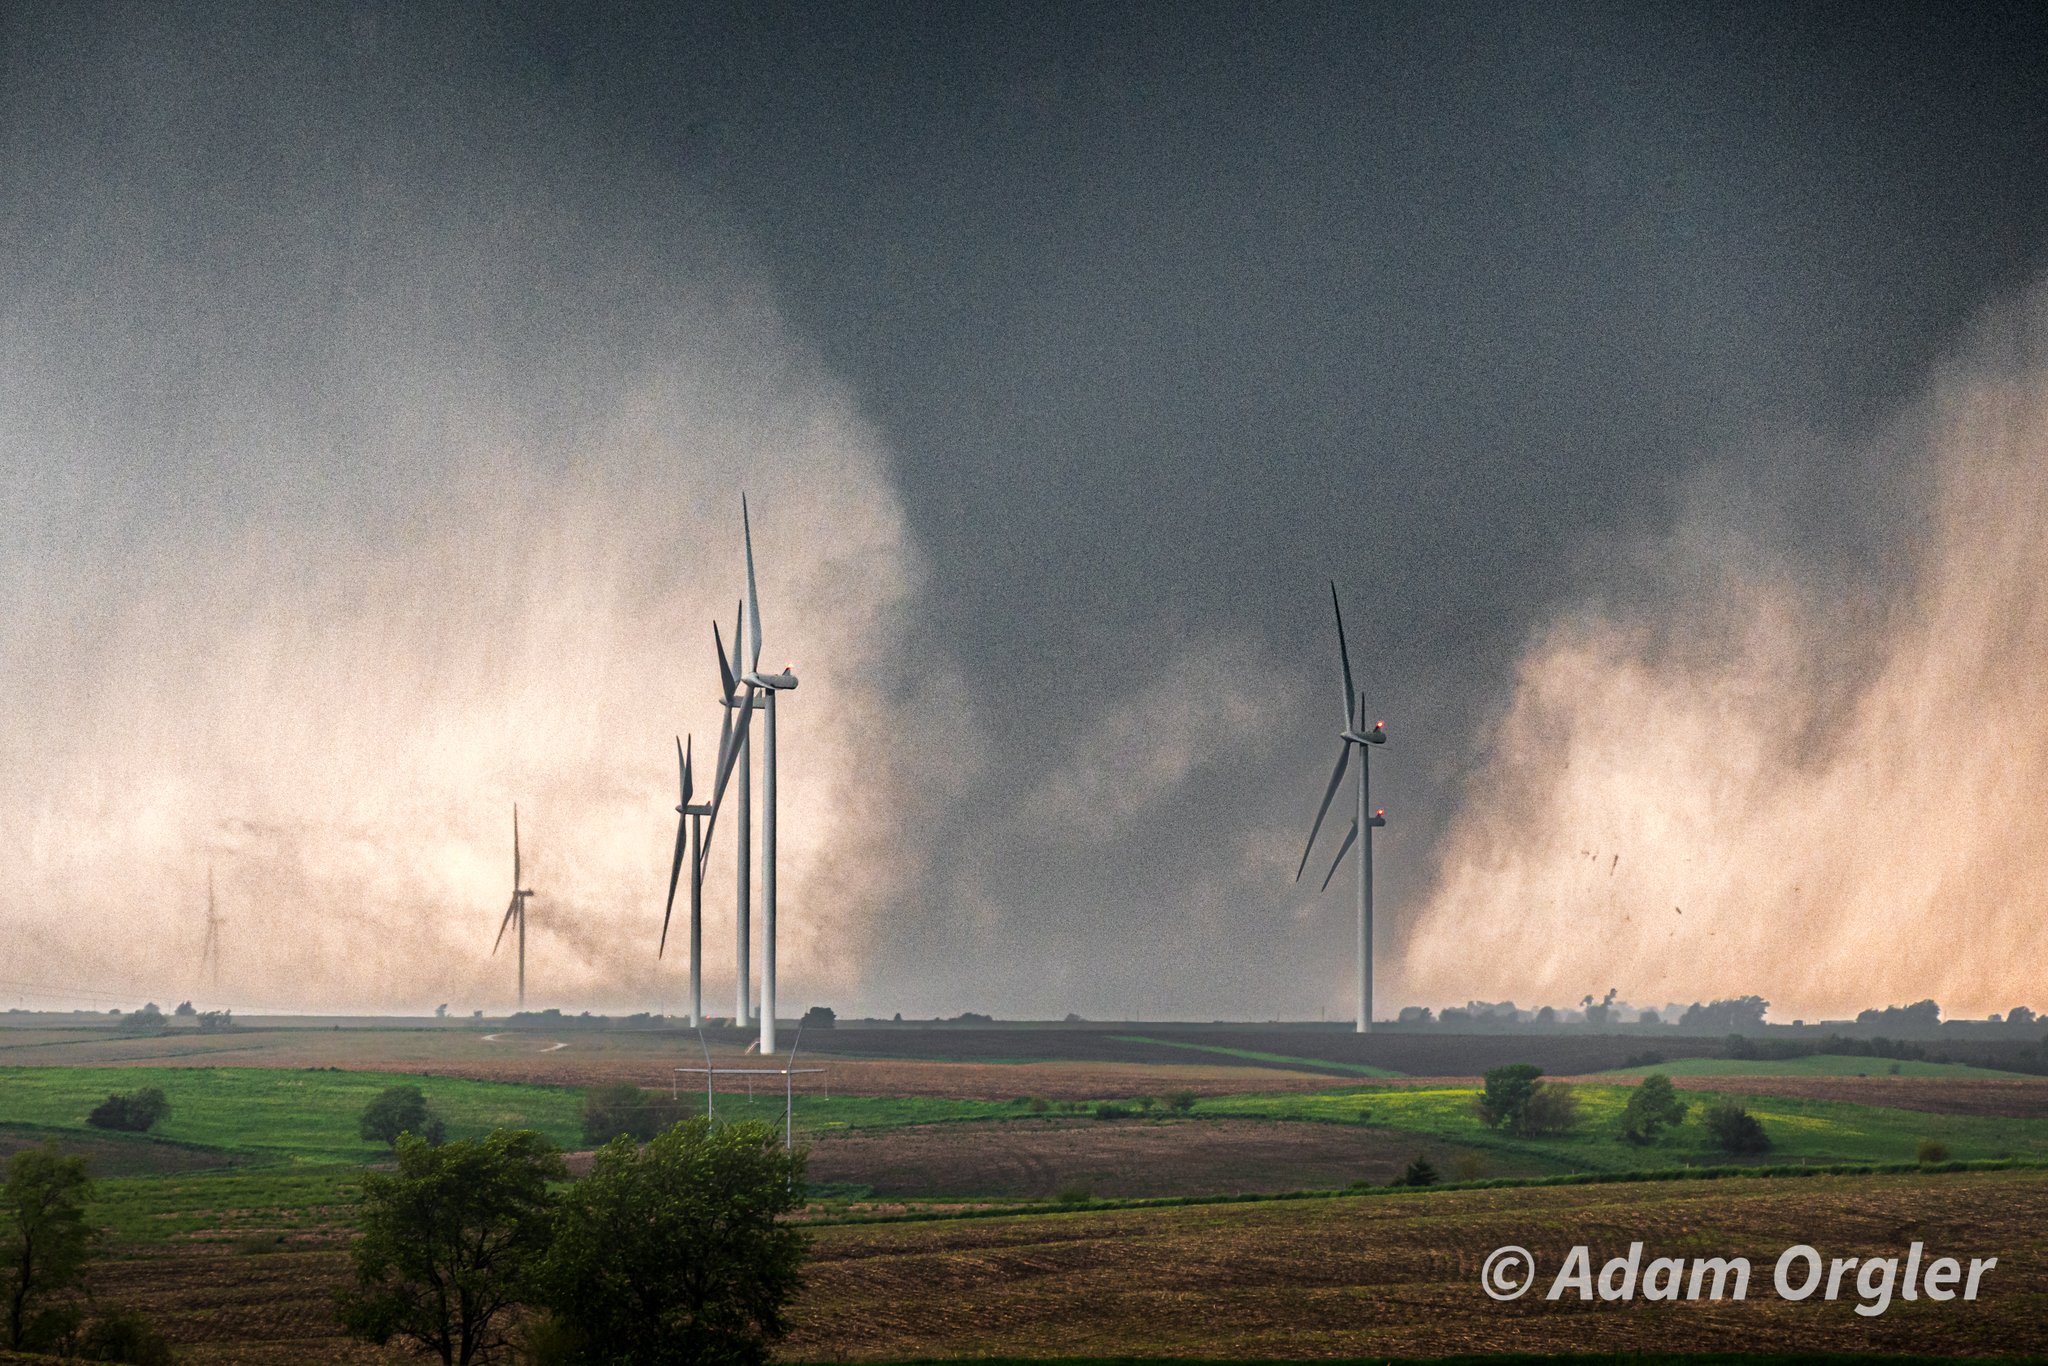 A photo of the tornado in a wind farm south of Greenfield, Iowa.